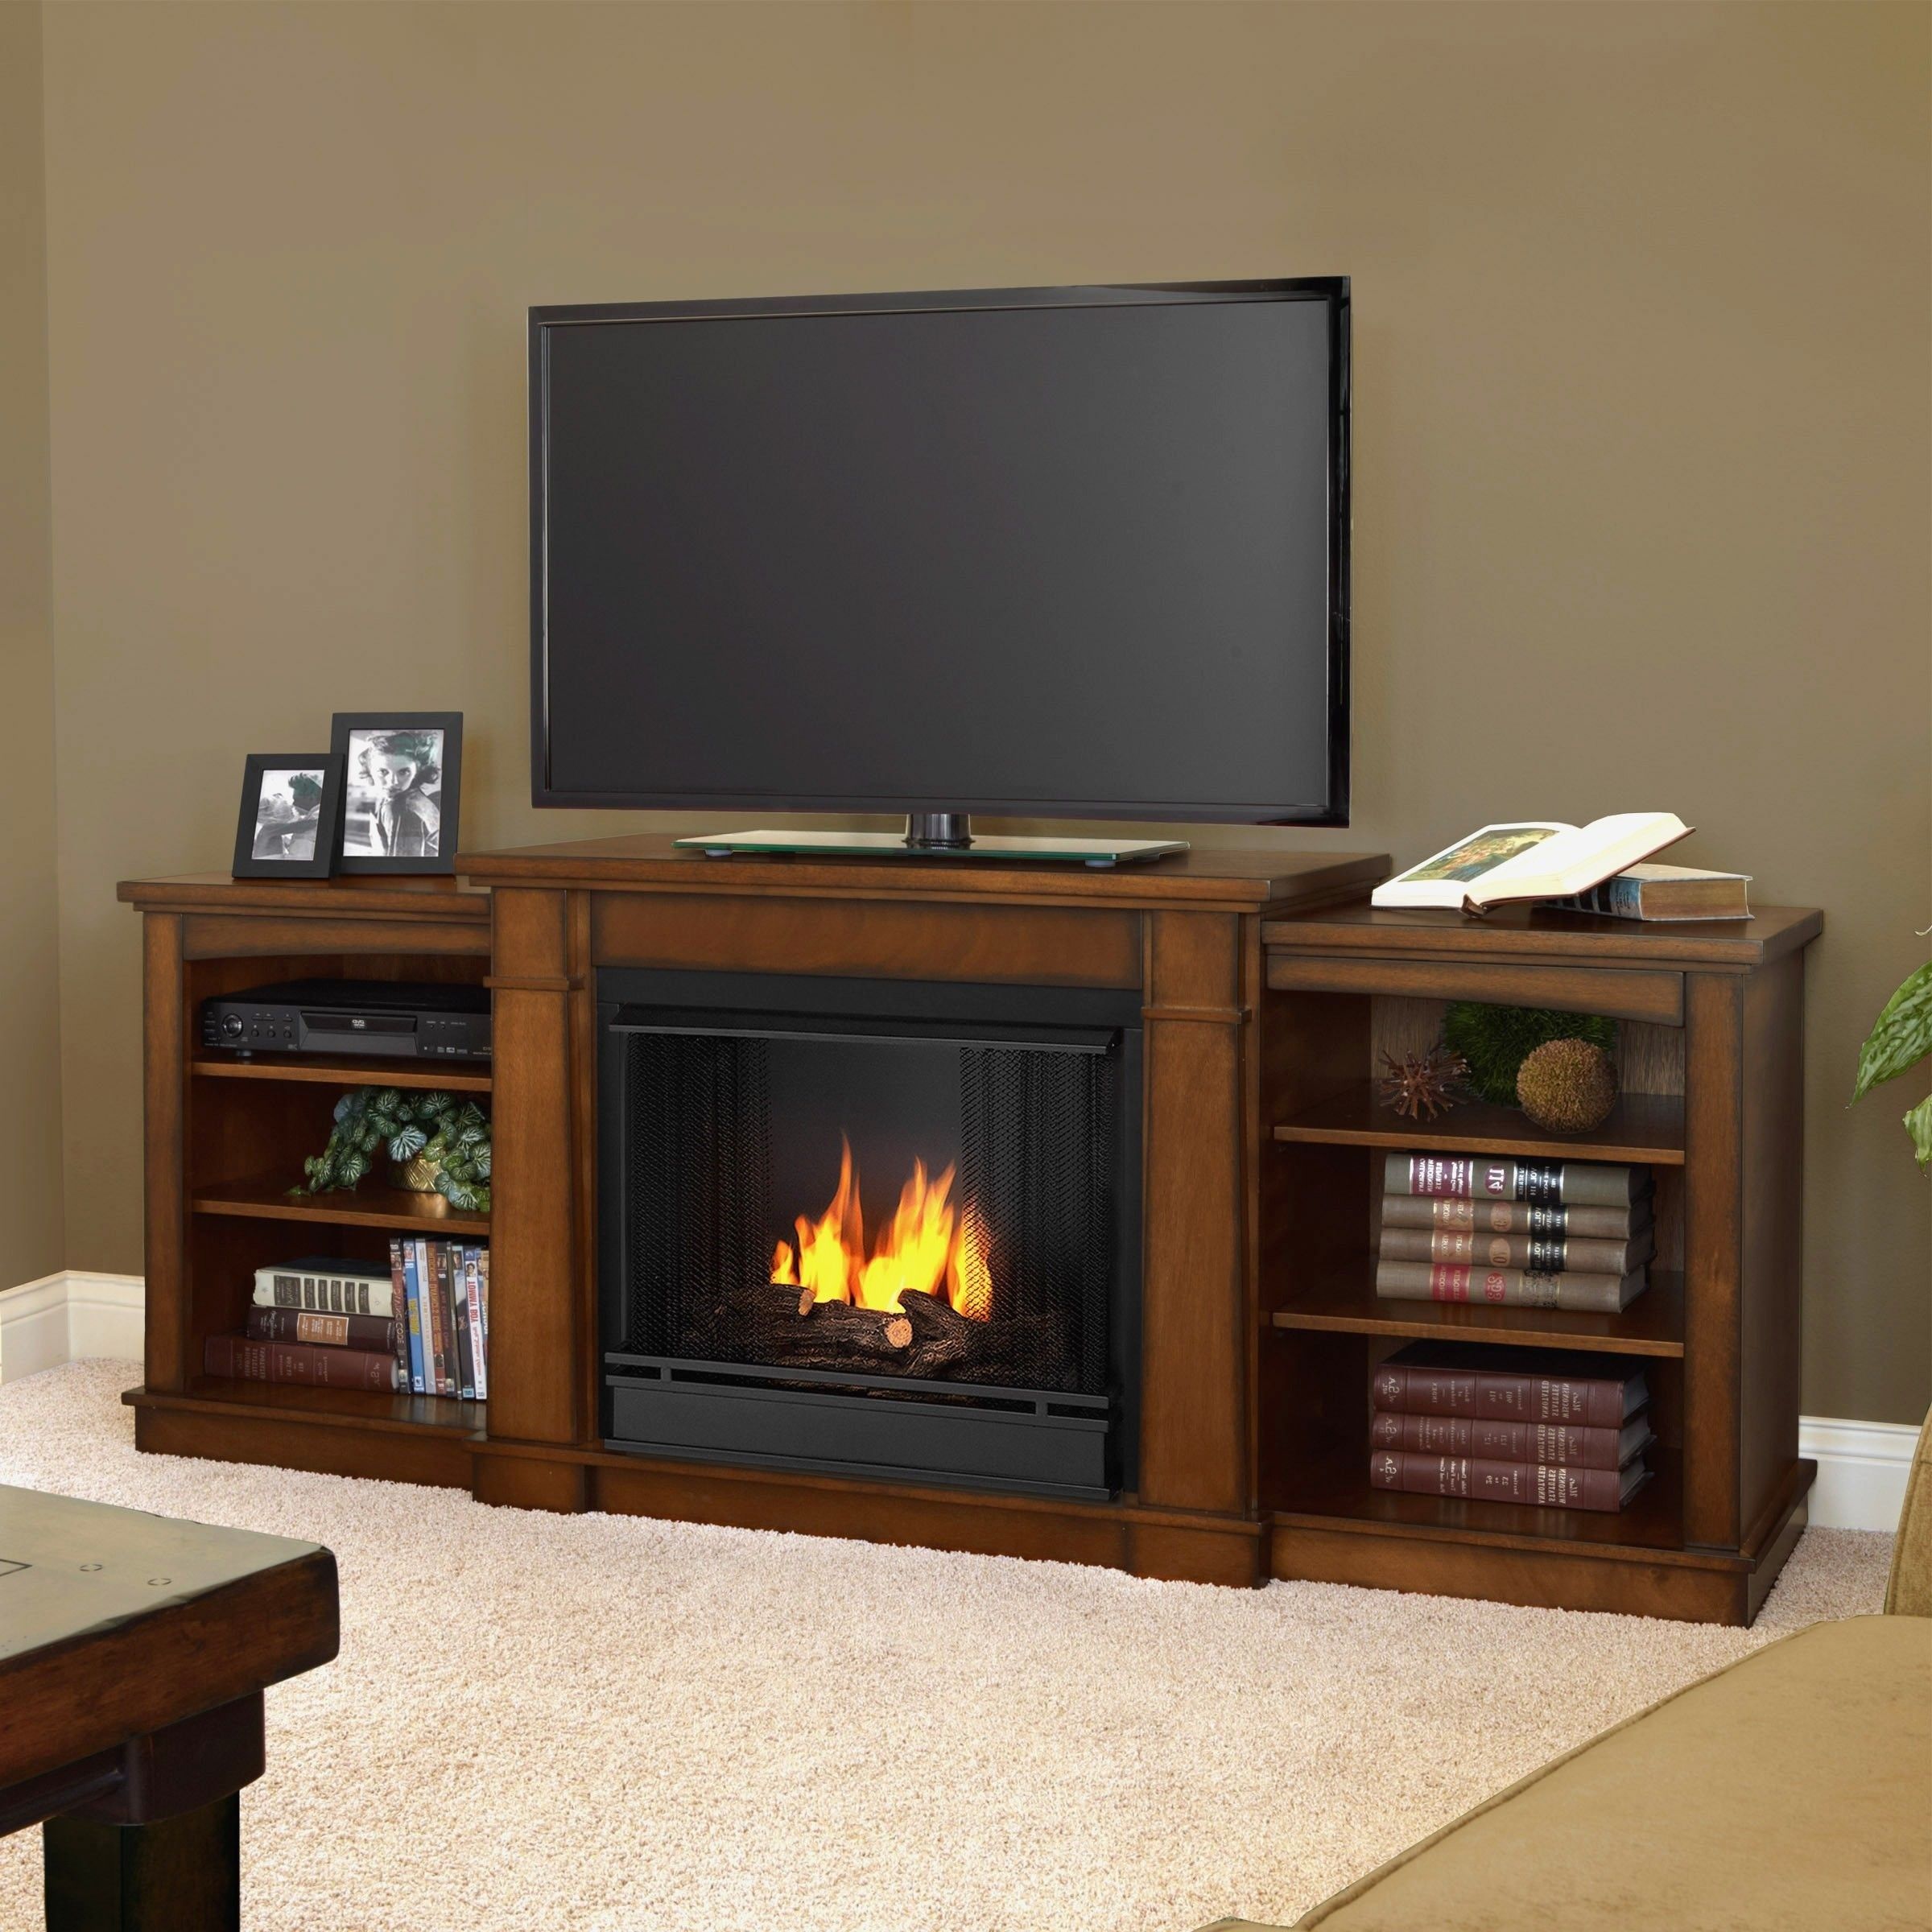 Fireplace Tv Stands For Flat Screens – Foter Inside Modern Fireplace Tv Stands (Gallery 15 of 20)